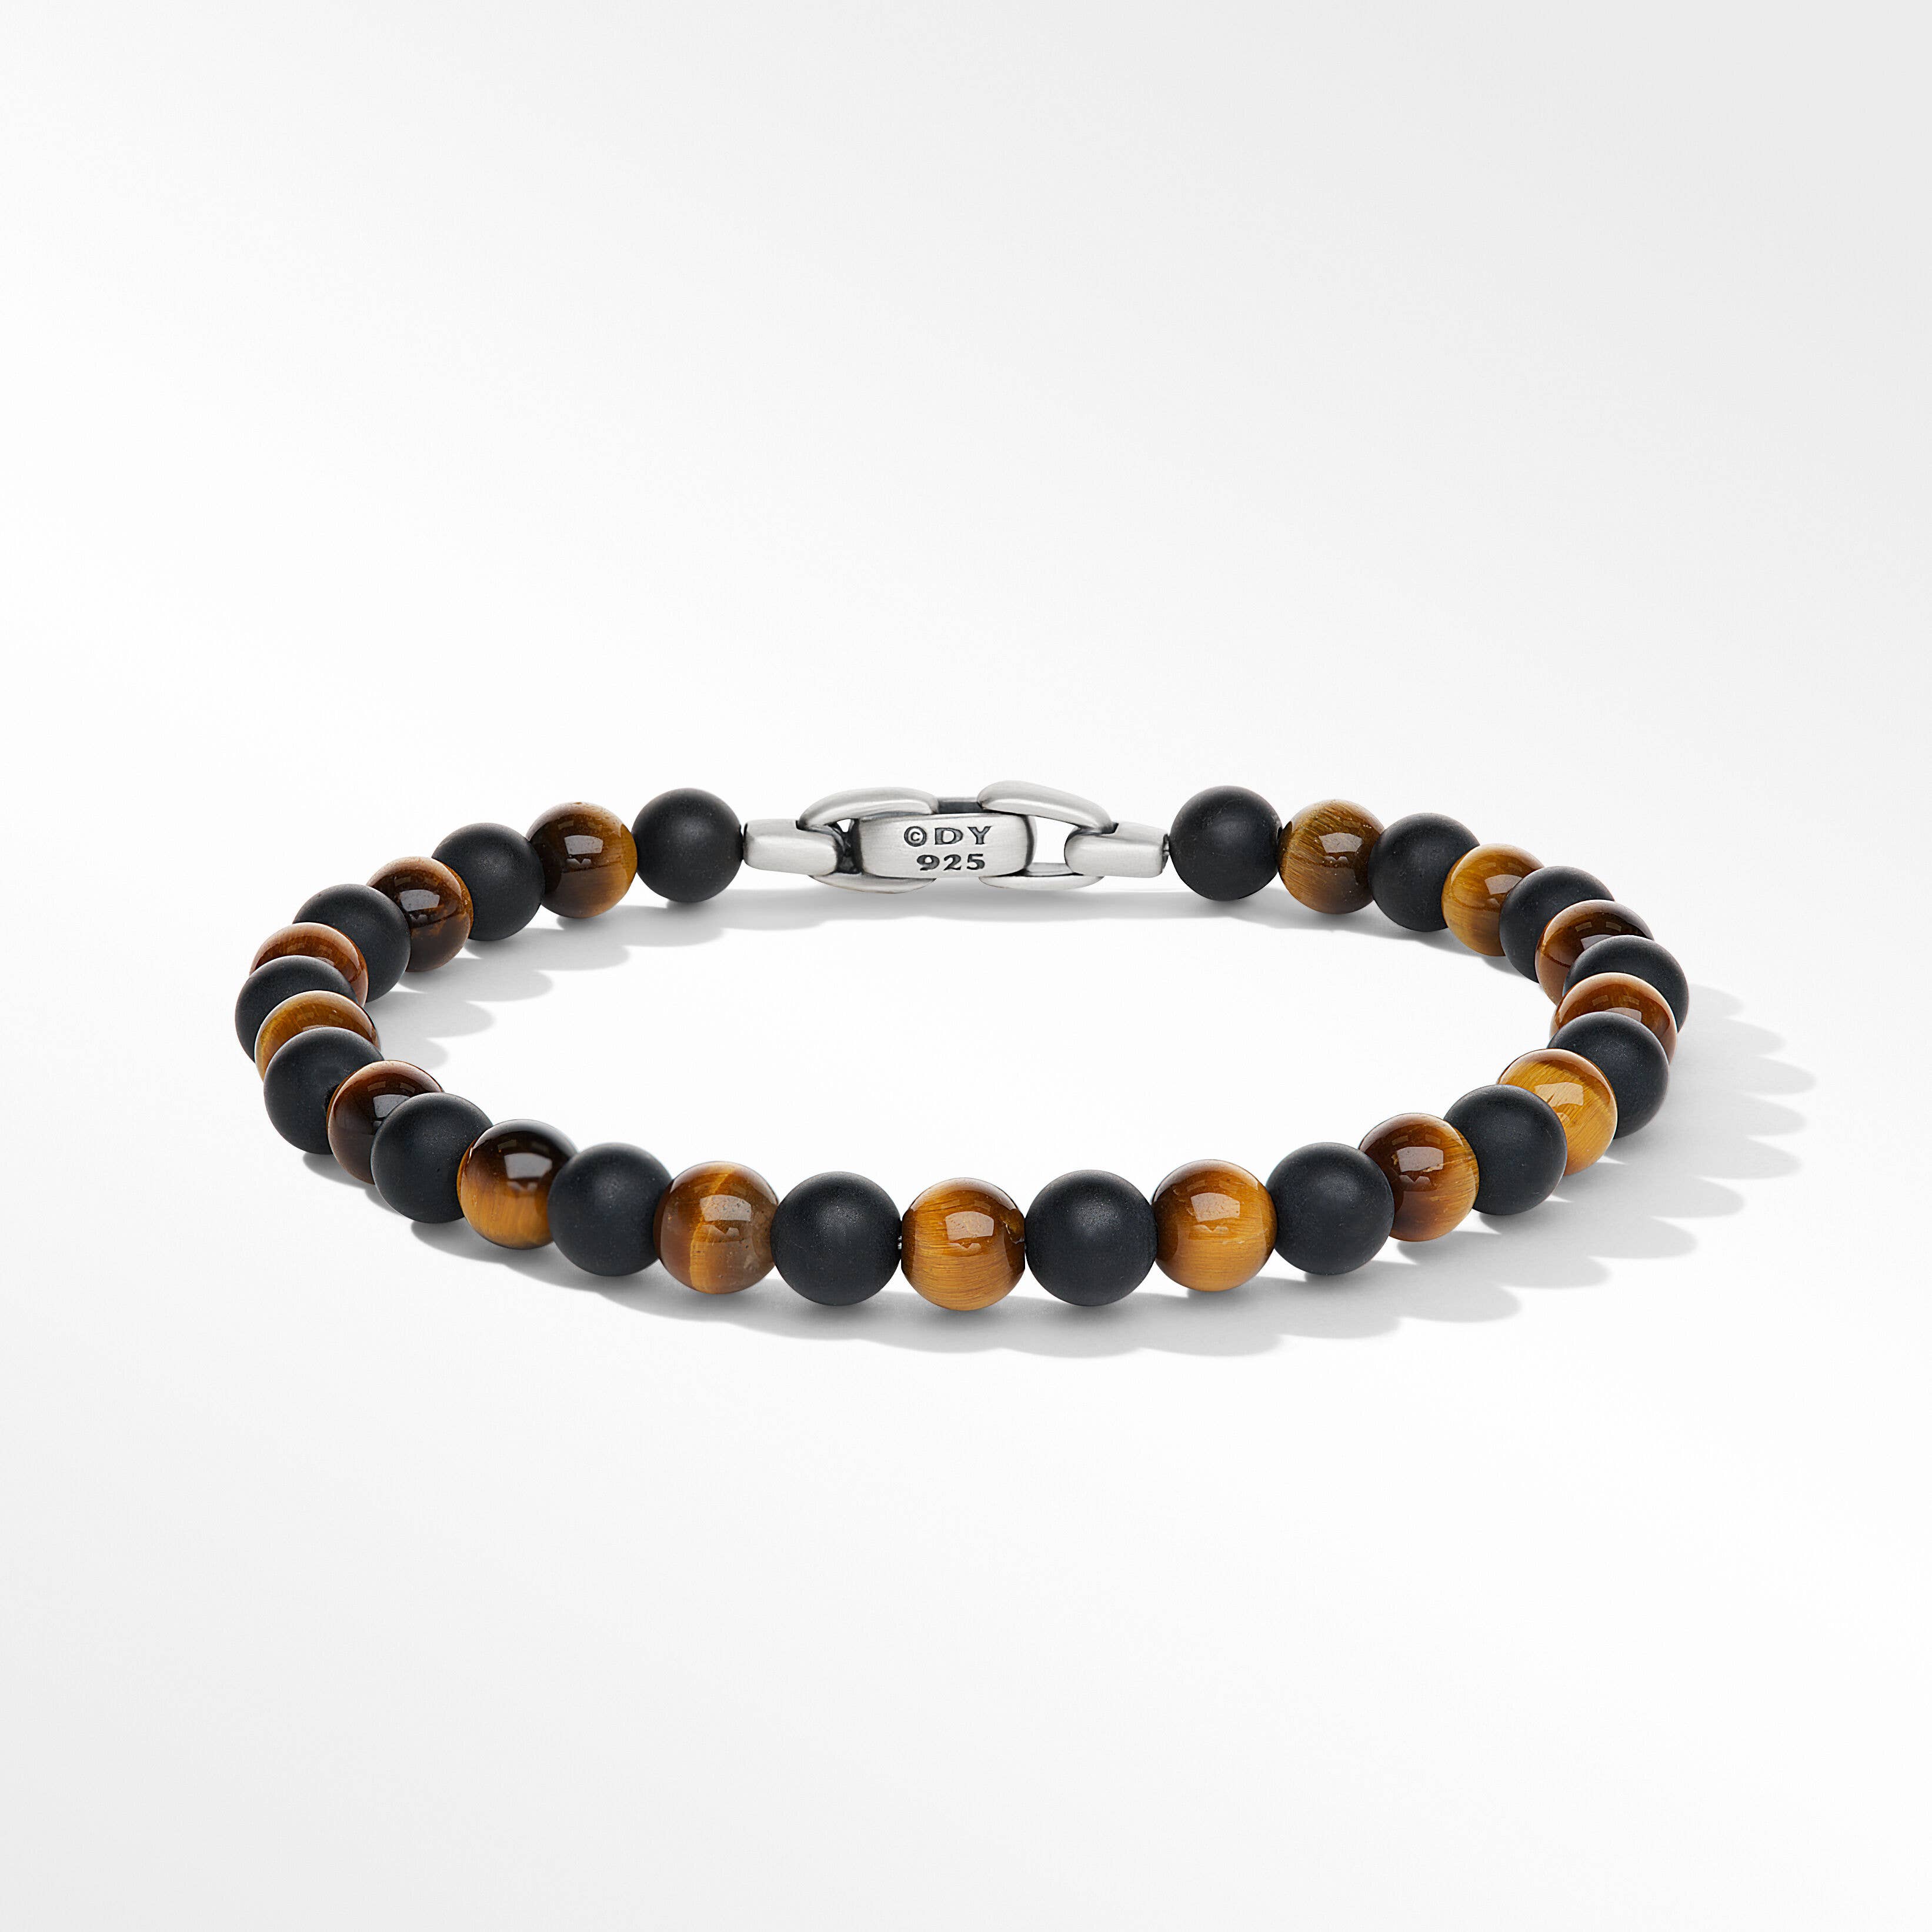 Spiritual Beads Alternating Bracelet in Sterling Silver with Black Onyx and Tiger's Eye